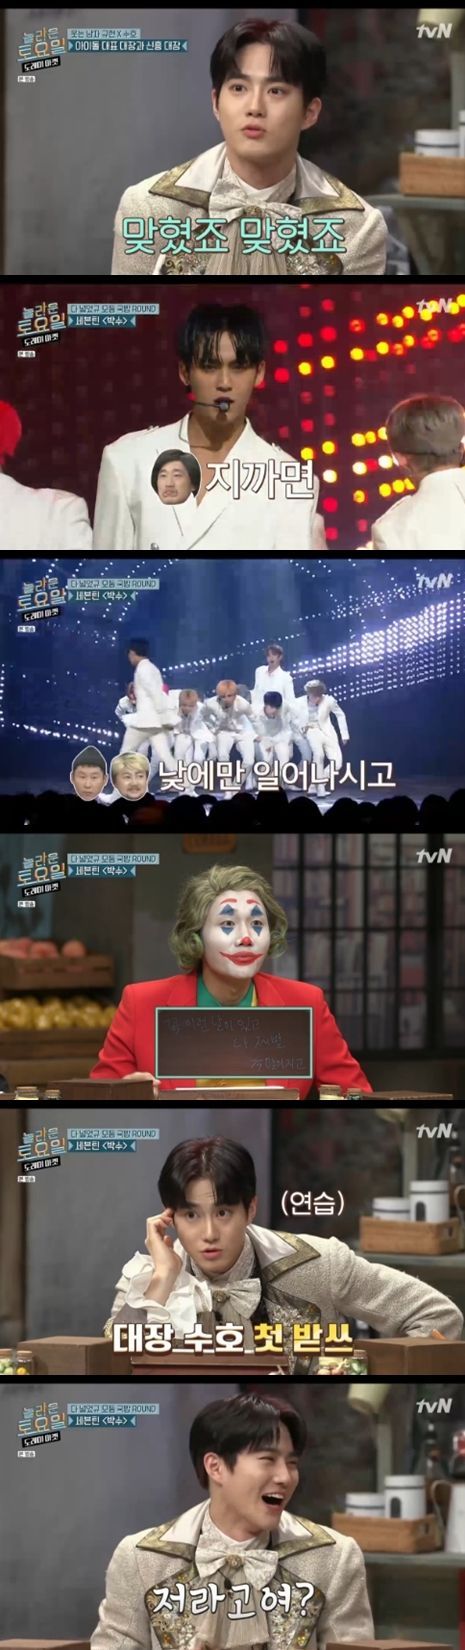 EXO Suho and Super Junior Cho Kyuhyun appeared on Amazing Saturday - Doremi Market (hereinafter Amazing Saturday), which was broadcast on the 1st, and attracted viewers with their unique artistic sense.Suho and Cho Kyuhyun, who are in charge of the main character Gwyn Plan in the musical Laughing Man recently, laughed by referring to Kyuline.Suho said he was now 30 and had to build my family, and Cho Kyuhyun said that he was not a Kyu line anymore.On this day, the Amazing Saturday group rice round came out as a problem to hit the ovation lyrics of Seventeen.Suho is a song that he knows well, and he challenged and admired the first dictation and became the main character of One shot.Suho also said that he had a good sense of smell to recognize who he was even if he smelled himself, and Cho Kyuhyun said that he was a puppy.Victor Hugos original musical Laughing Man, starring Suho and Cho Kyuhyun, will be performed at the Seoul Arts Center Opera House until March 1.On the other hand, tvN Amazing Saturday - Doremi Market is broadcast every Saturday at 7:40 pm.